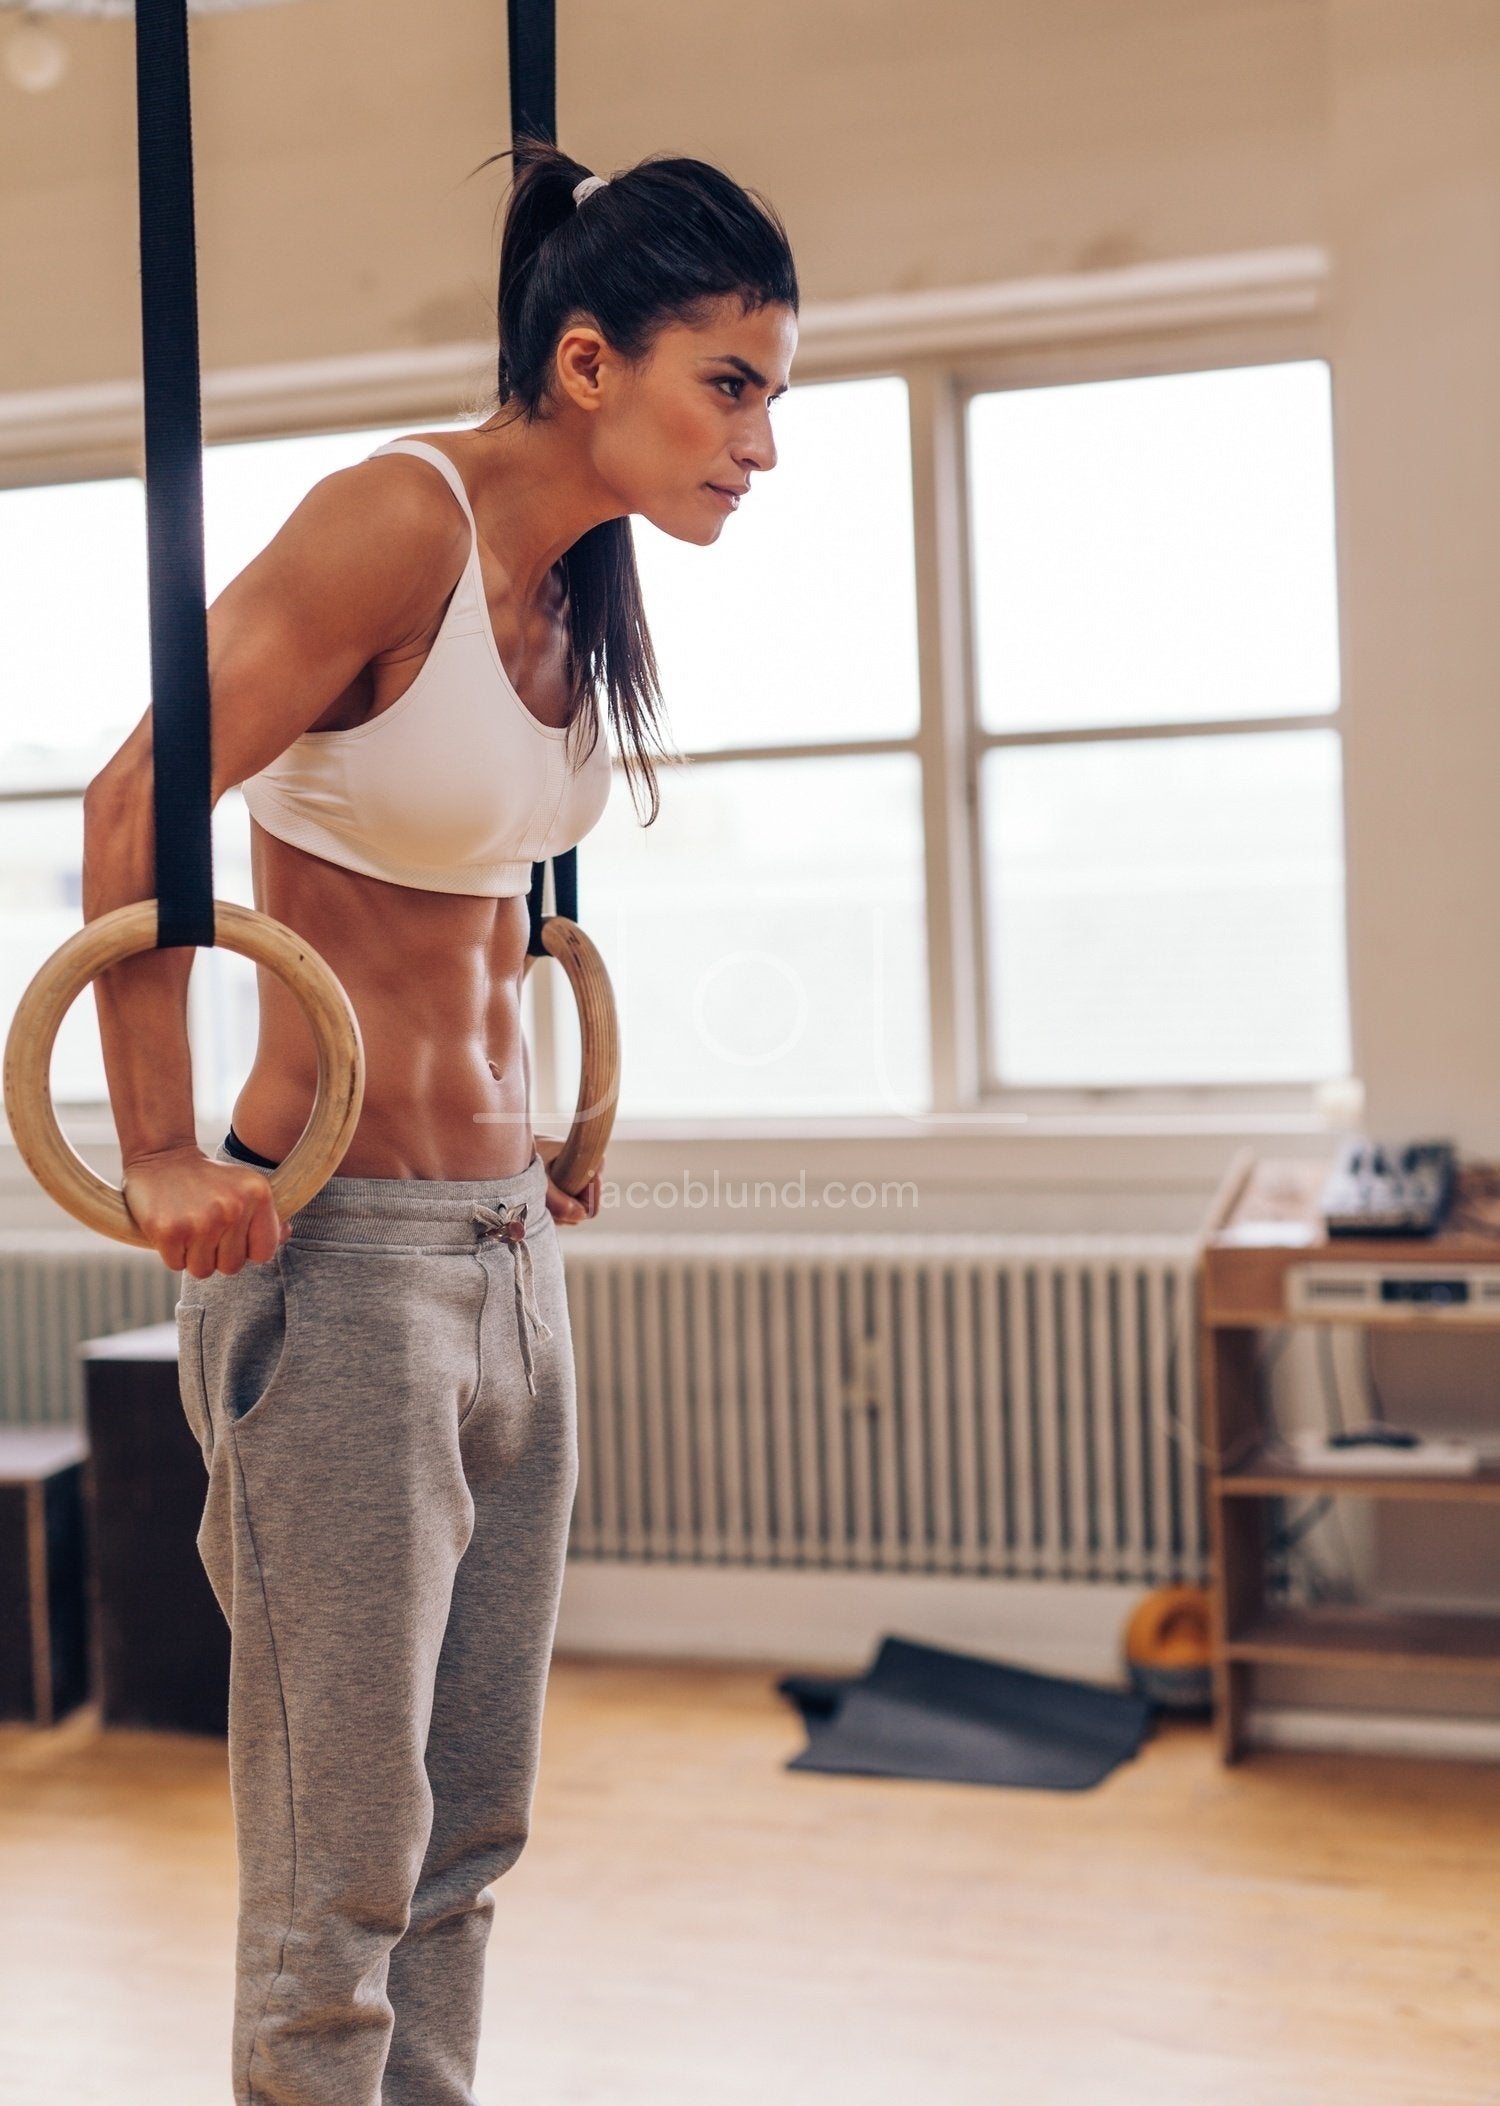 Determined woman exercising with gymnastic rings in gym stock